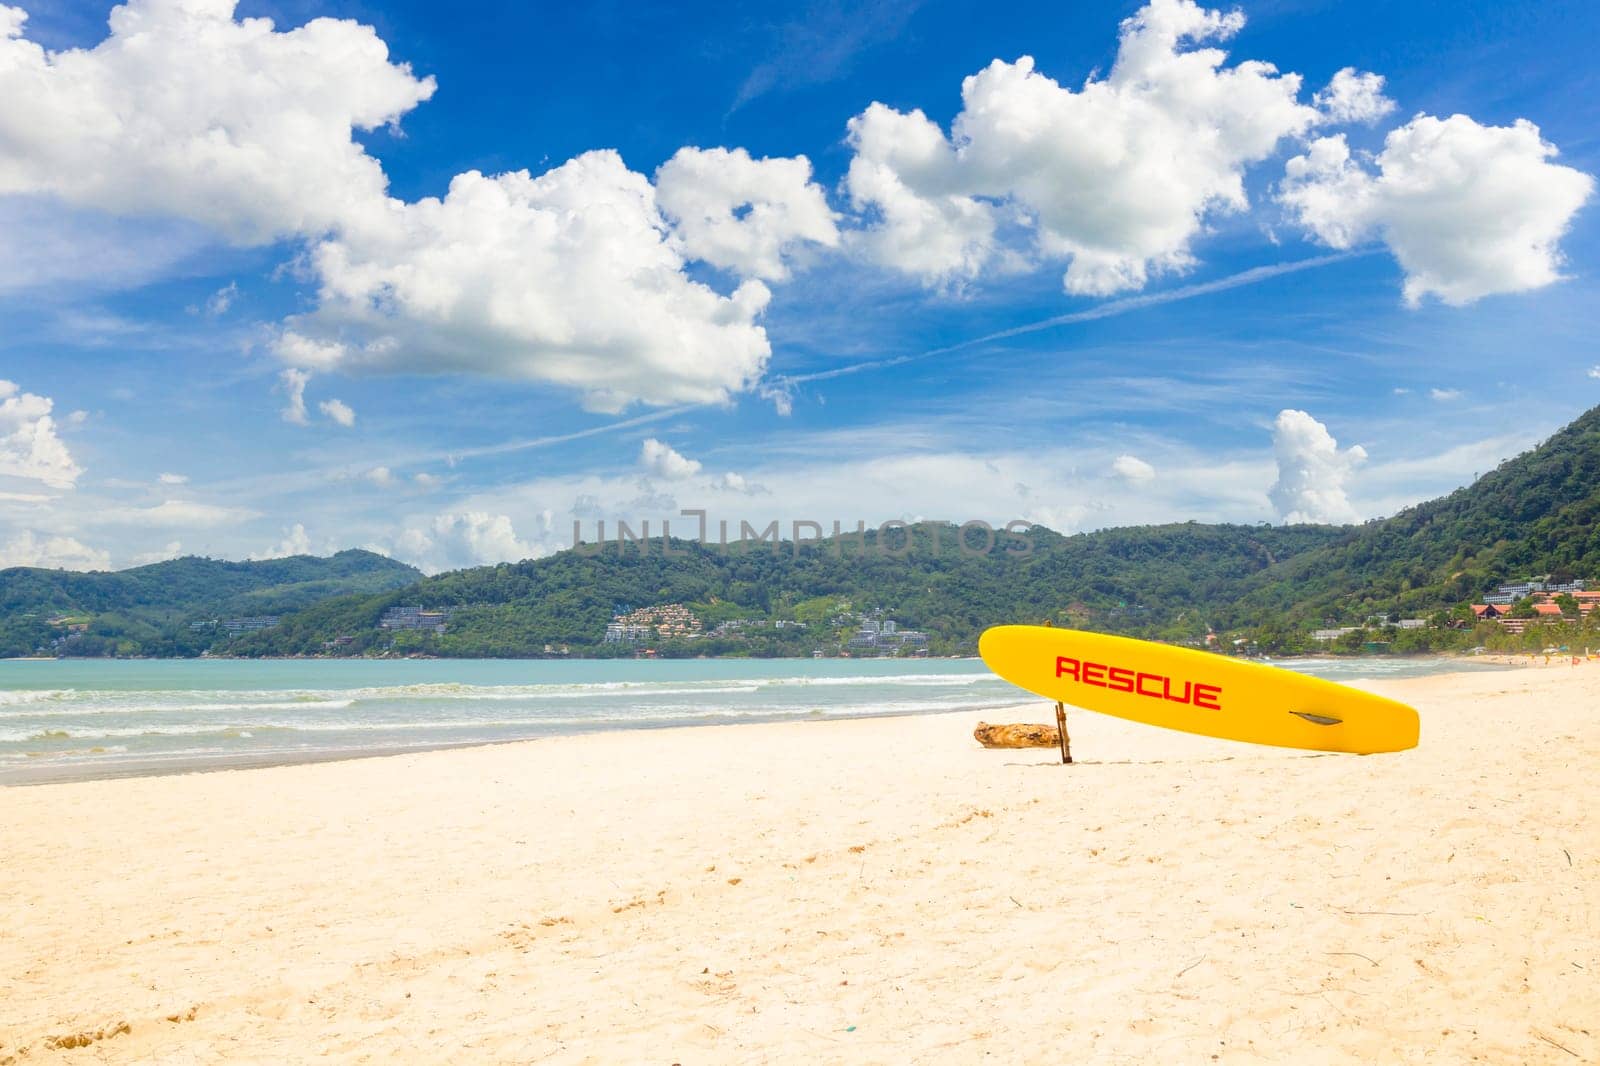 The Surf Rescue surfboard on , beach, Phoket Southern of thailand by Gamjai